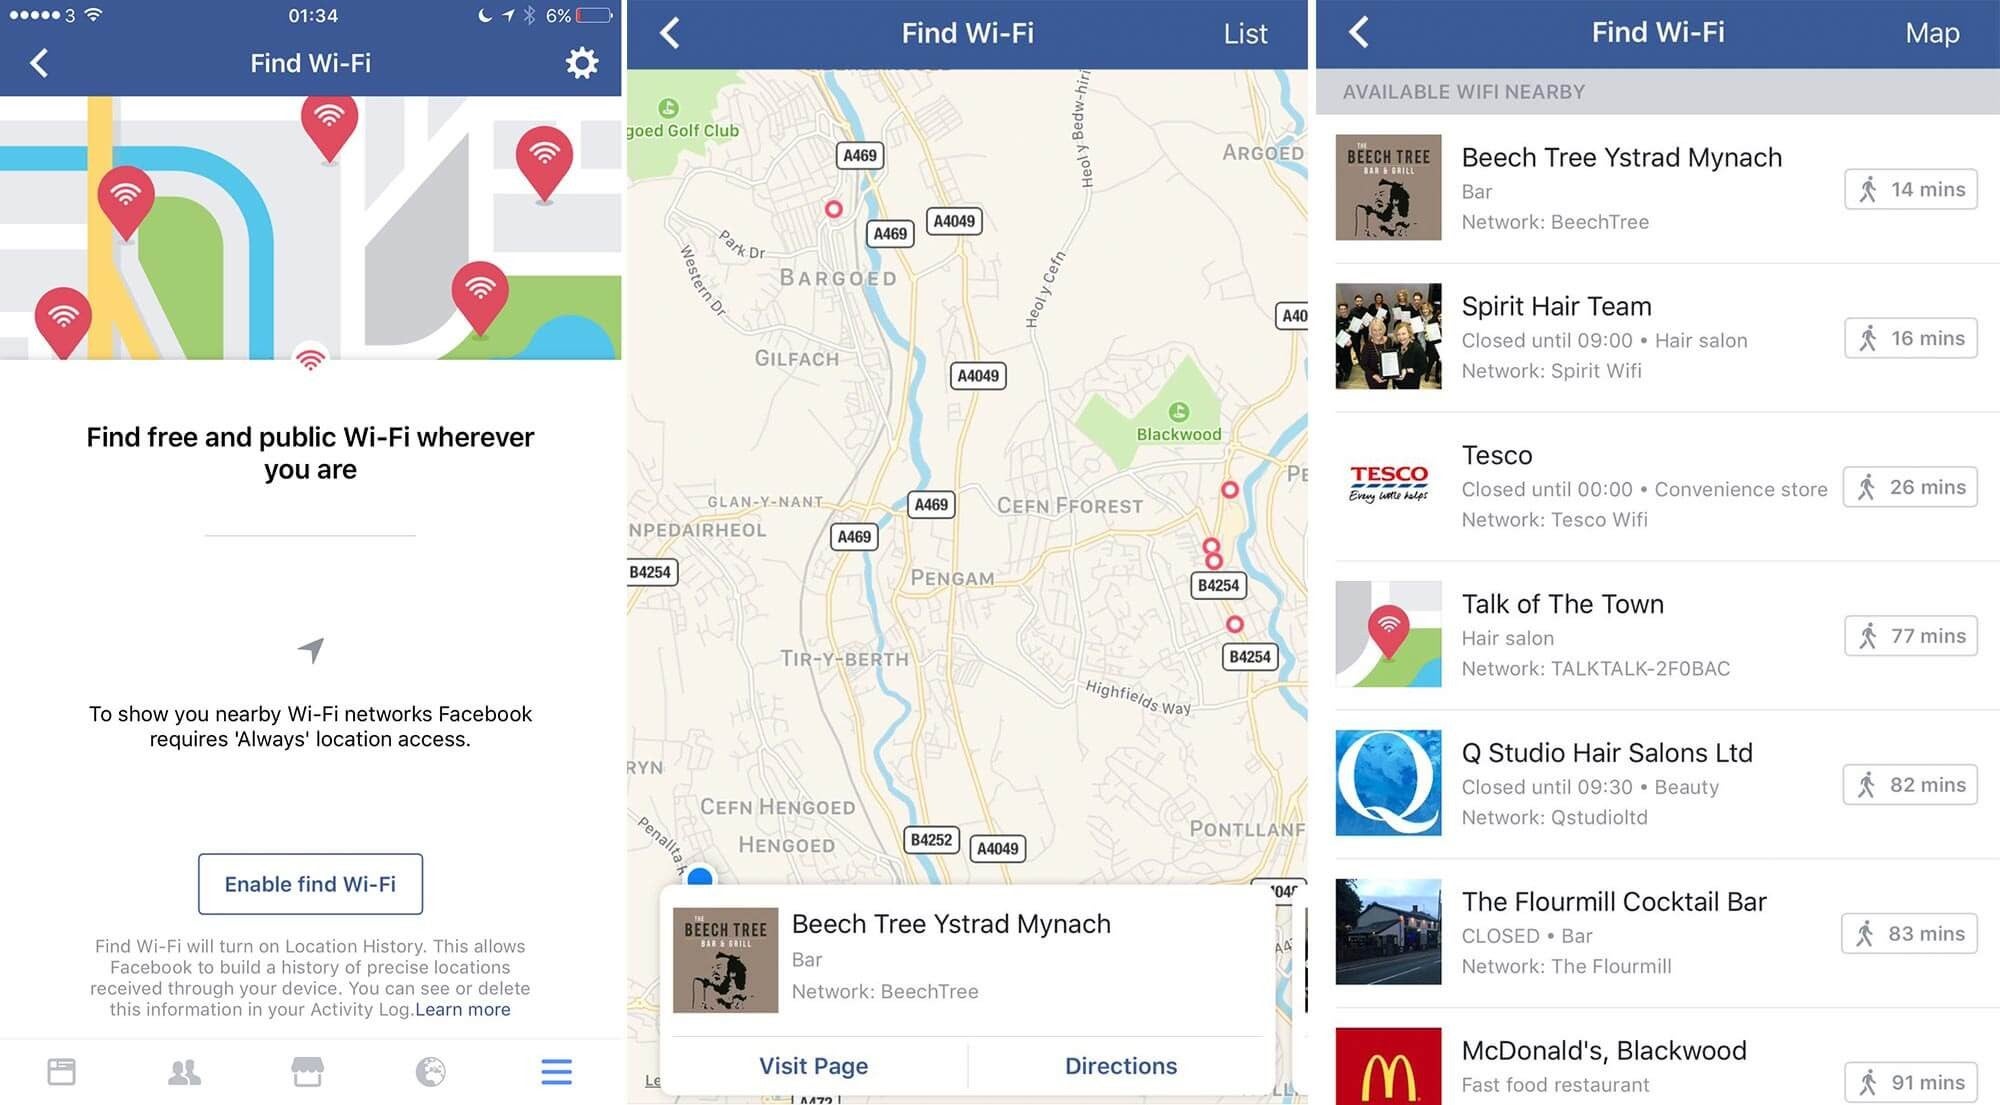 Screenshots courtesy of Venture Beat - Facebook working on public Wi-Fi “radar” for mobile app